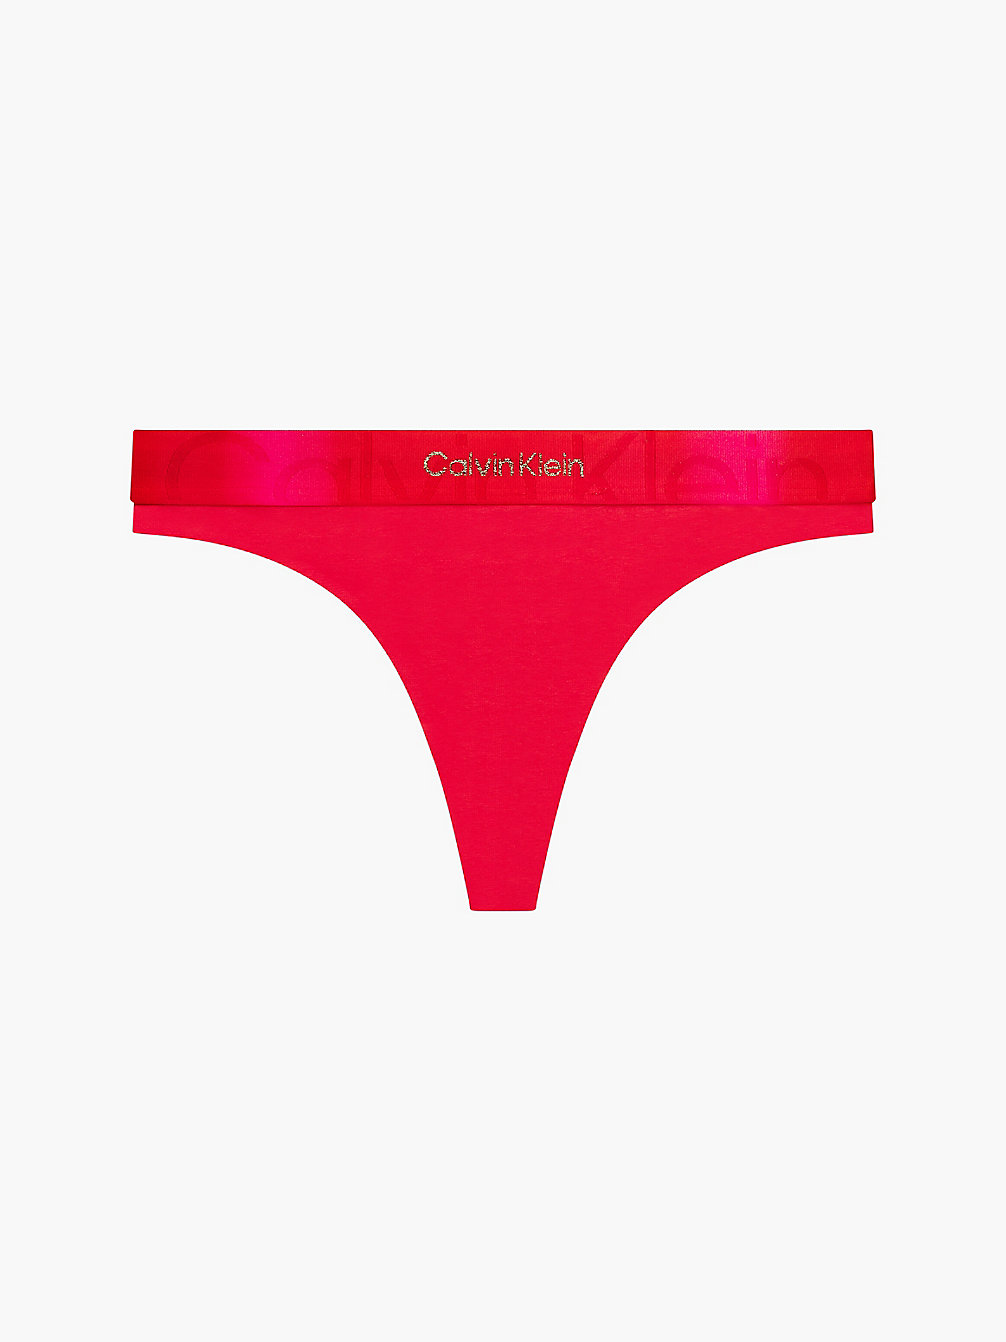 Tanga - Embossed Icon > EXACT > undefined mujer > Calvin Klein